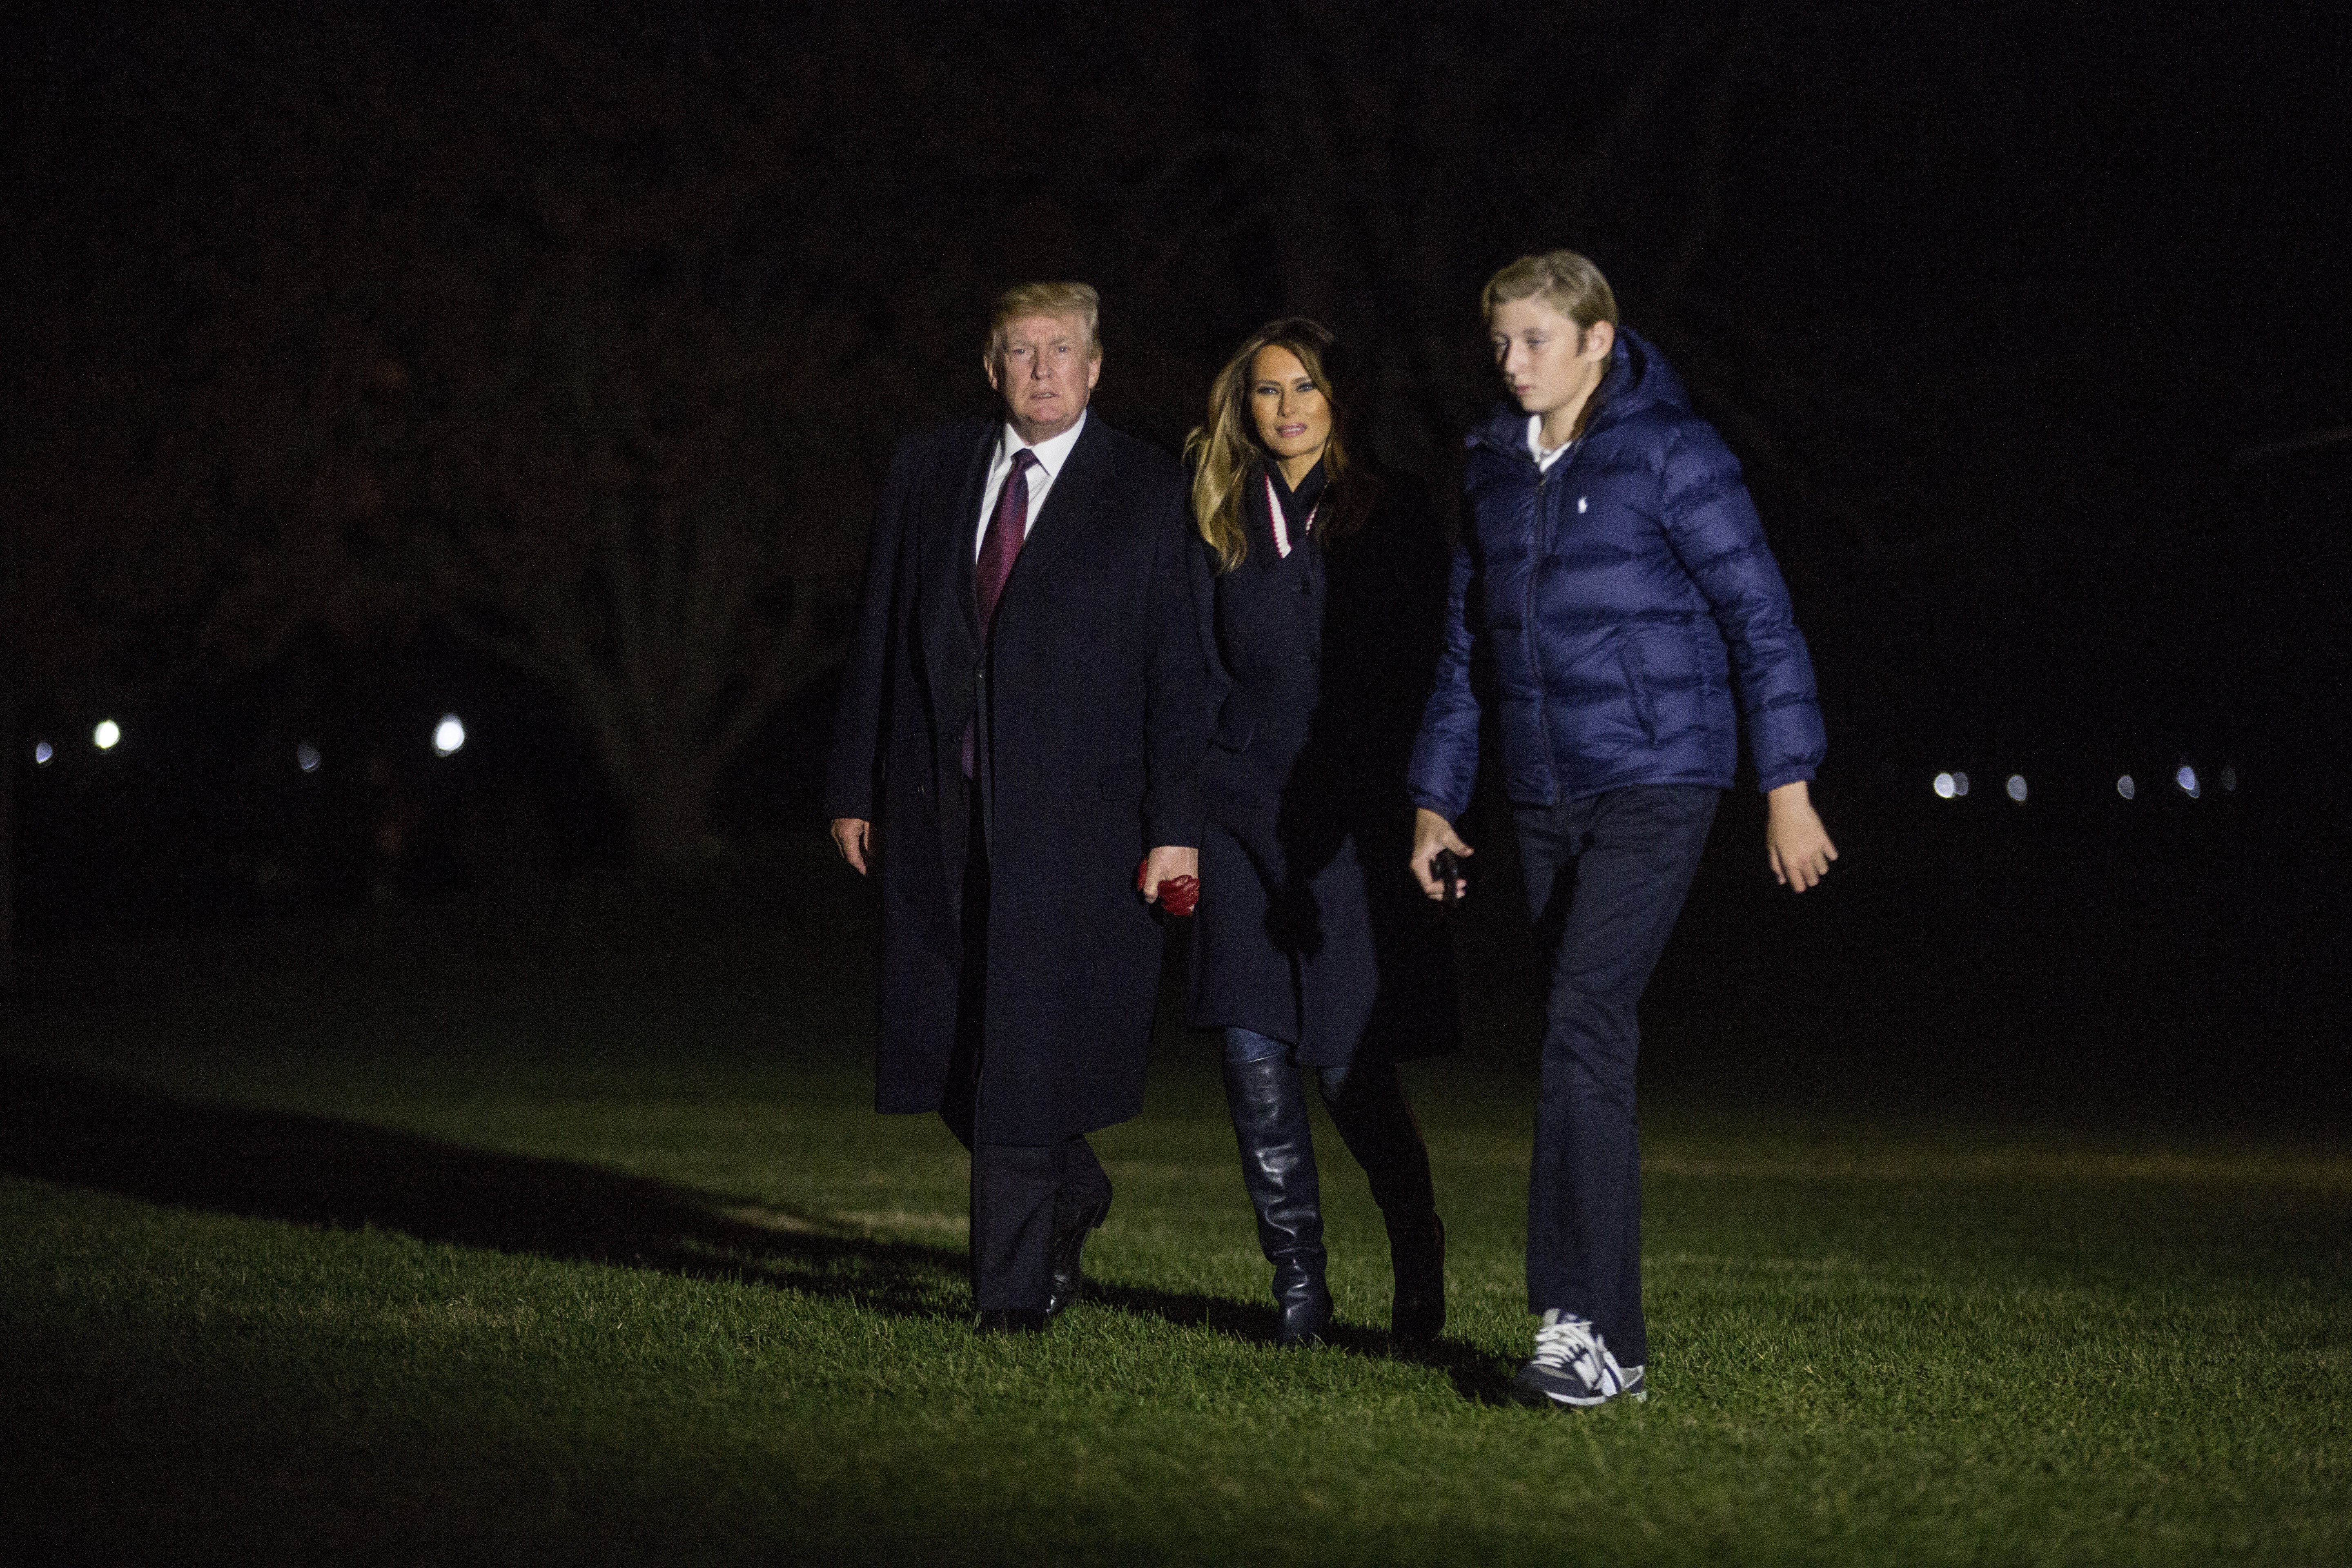 President Donald Trump, first lady Melania Trump and son Barron Trump cross the South Lawn of the White House November 25, 2018 | Photo: GettyImages